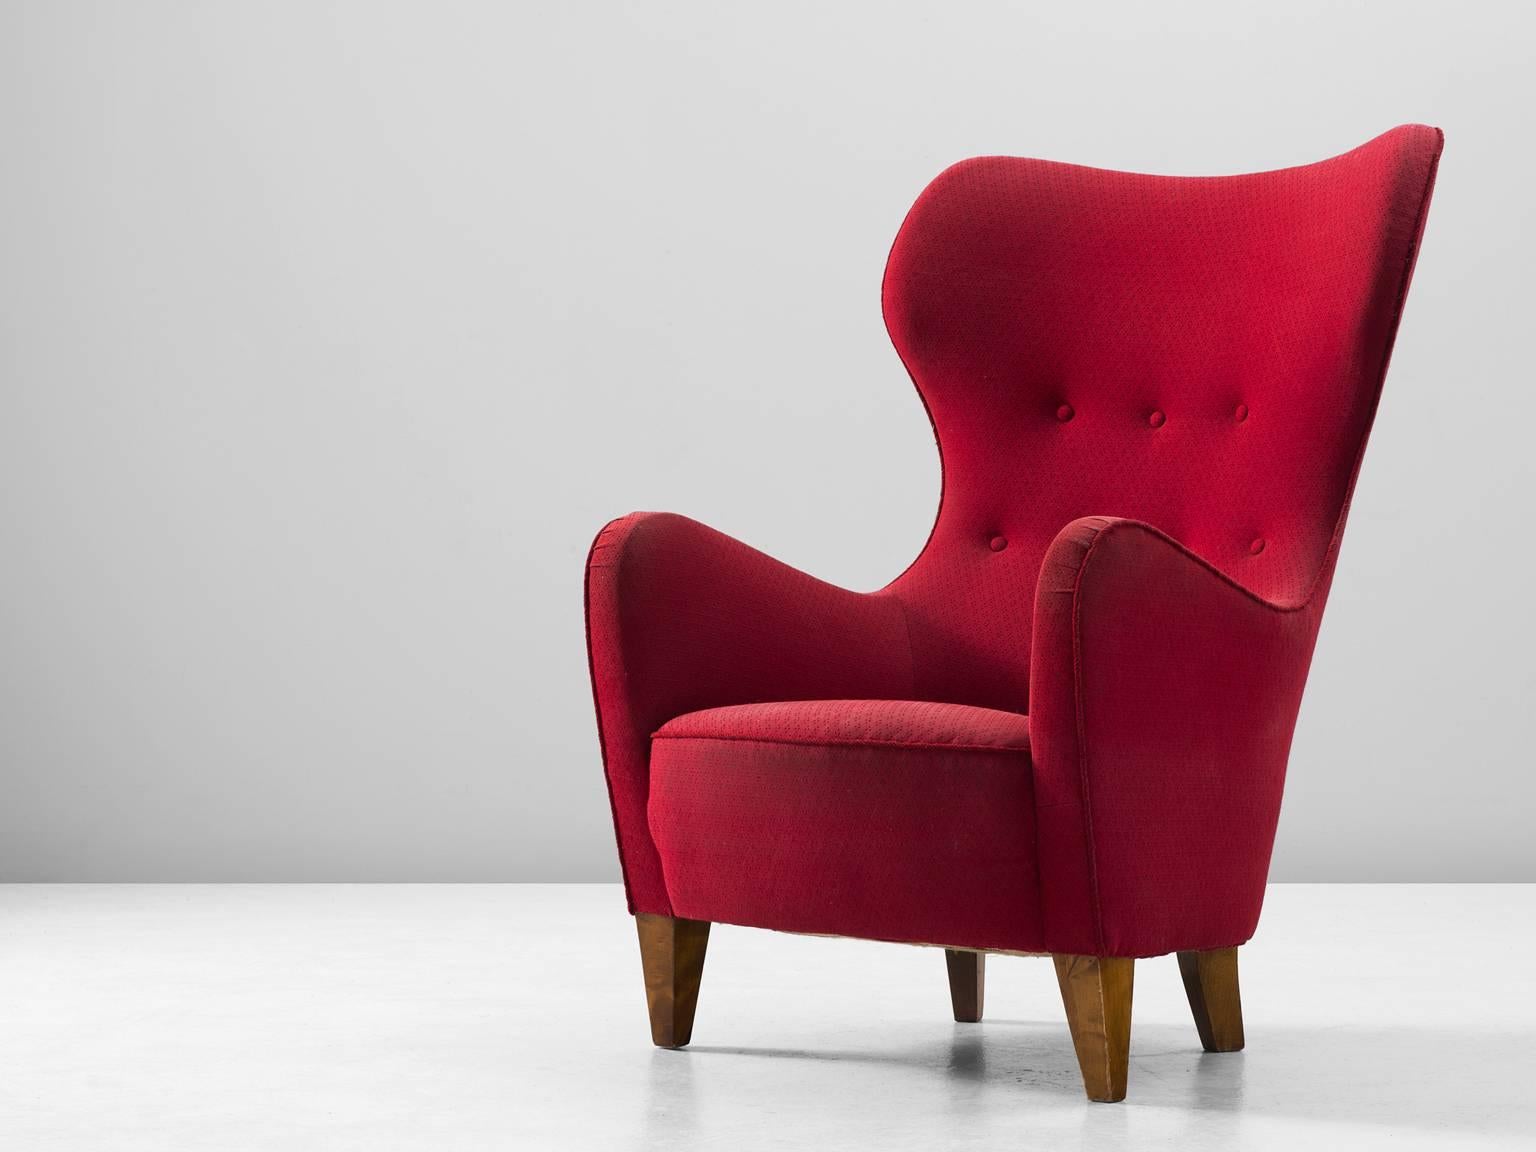 Wingback chair, in wood and fabric, Scandinavia, 1950s.

High back chair in red fabric upholstery. This chair shows the characteristics of the Scandinavian Modern style and great resemblance to the early lounge chairs of Fritz Hansen and Rud